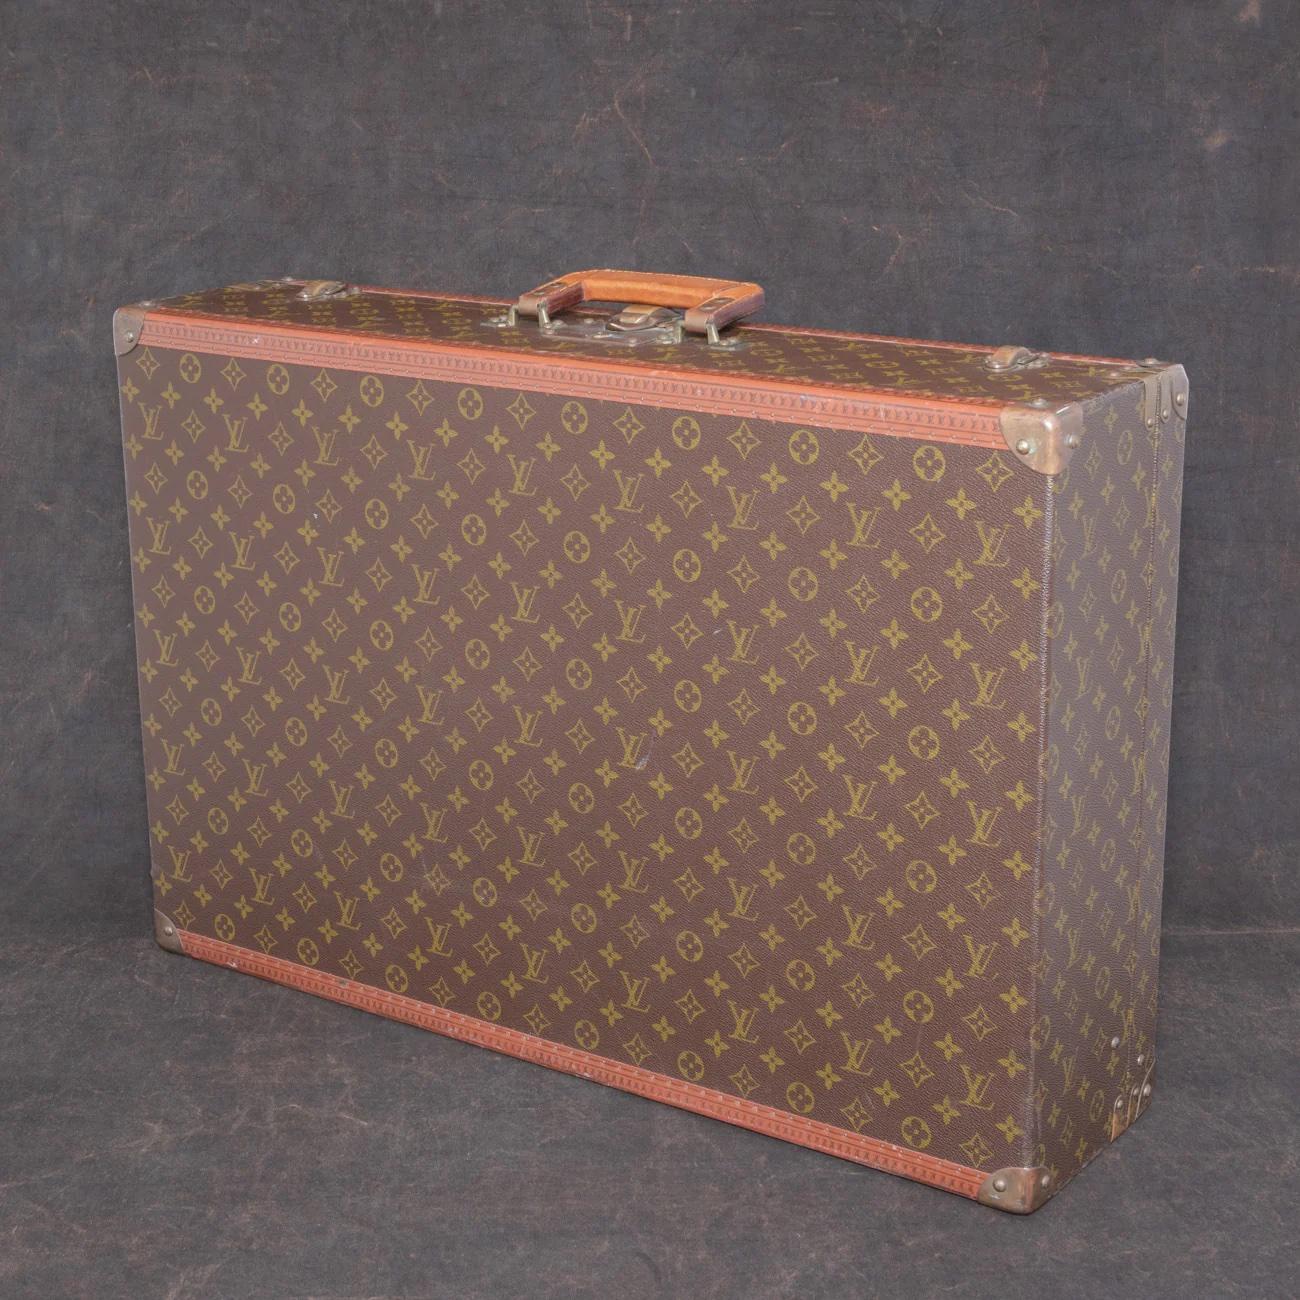 Louis Vuitton large ‘Fly-el’ suitcase in LV monogram pattern coated canvas with edges trimmed in lozine, a layered leather flat handle and unpolished brass fittings.

Securing the lid of the case is a central sprung catch with a lock, accompanied by